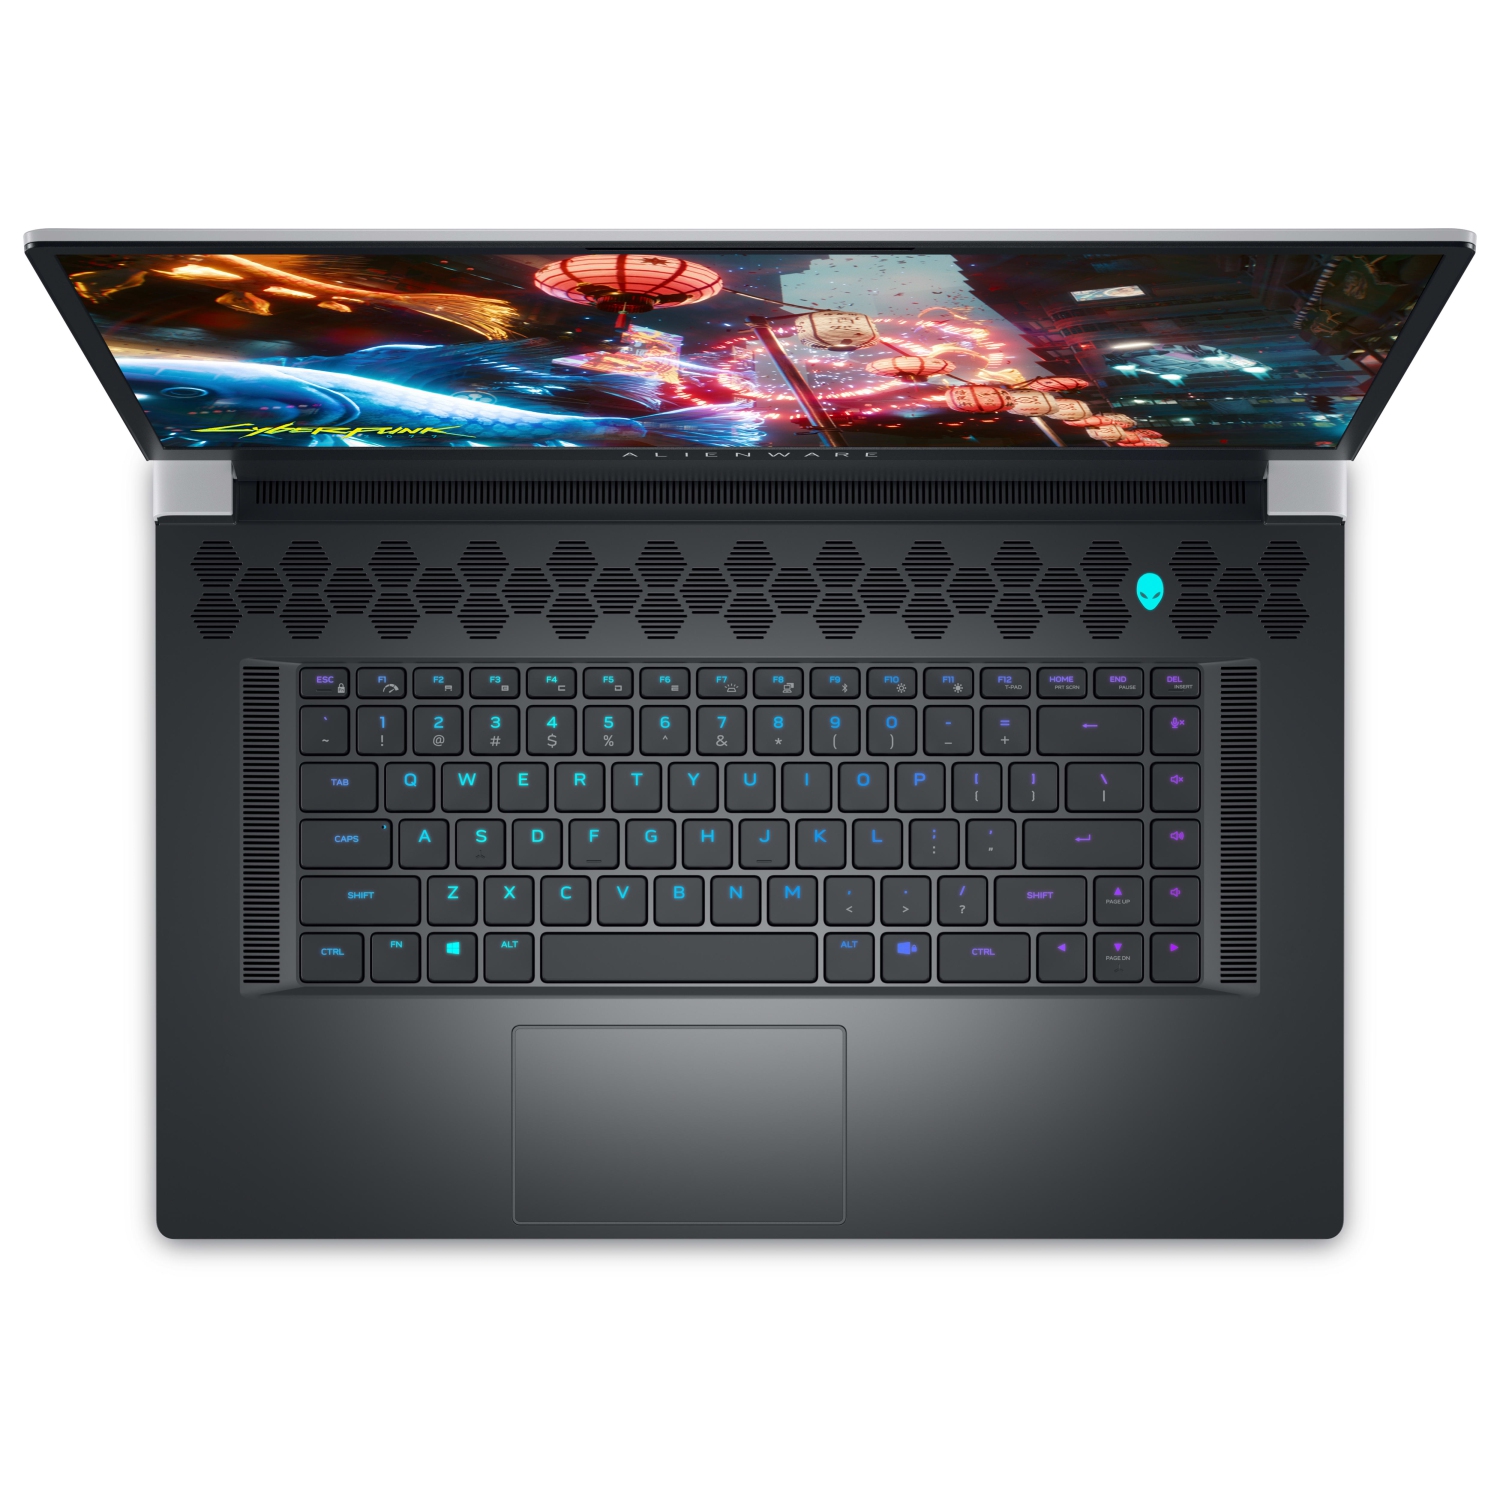 Refurbished (Excellent) – Dell Alienware X17 R2 Gaming Laptop (2022) | 17.3" FHD | Core i9 - 2TB SSD - 32GB RAM - 3080 Ti | 14 Cores @ 5 GHz - 12th Gen CPU - 16GB GDDR6X